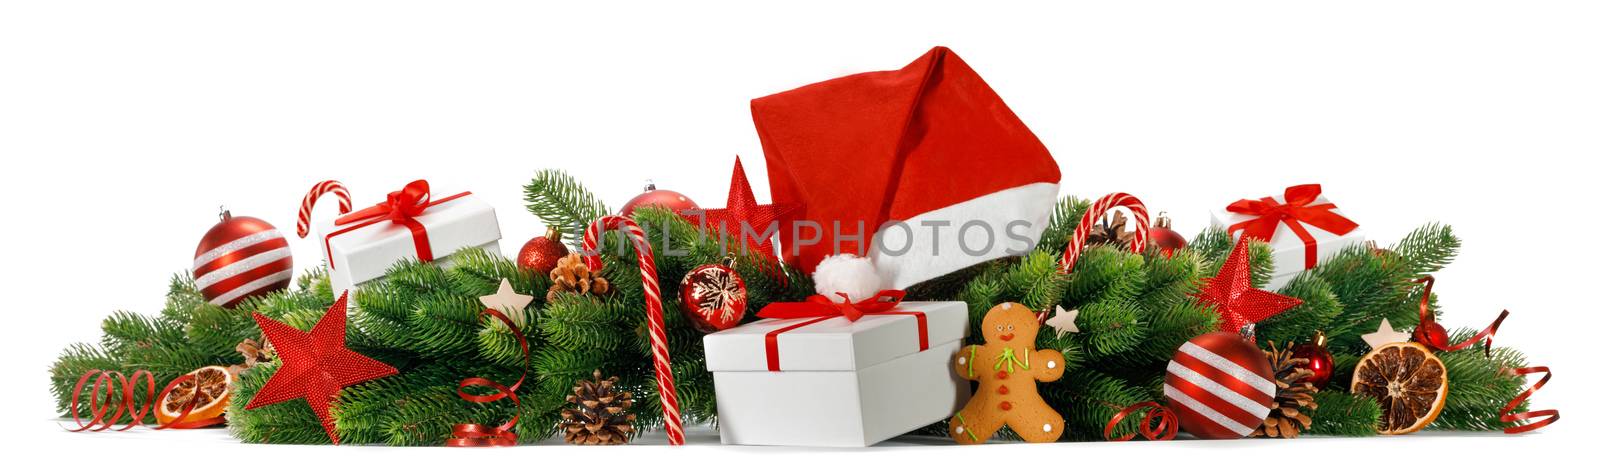 Merry Christmas greeting card idea with green fir tree, gifts, red Santa Claus hat, decor of balls and baubles, pine cones, candy canes and gingerbread cookies studio isolated on white background